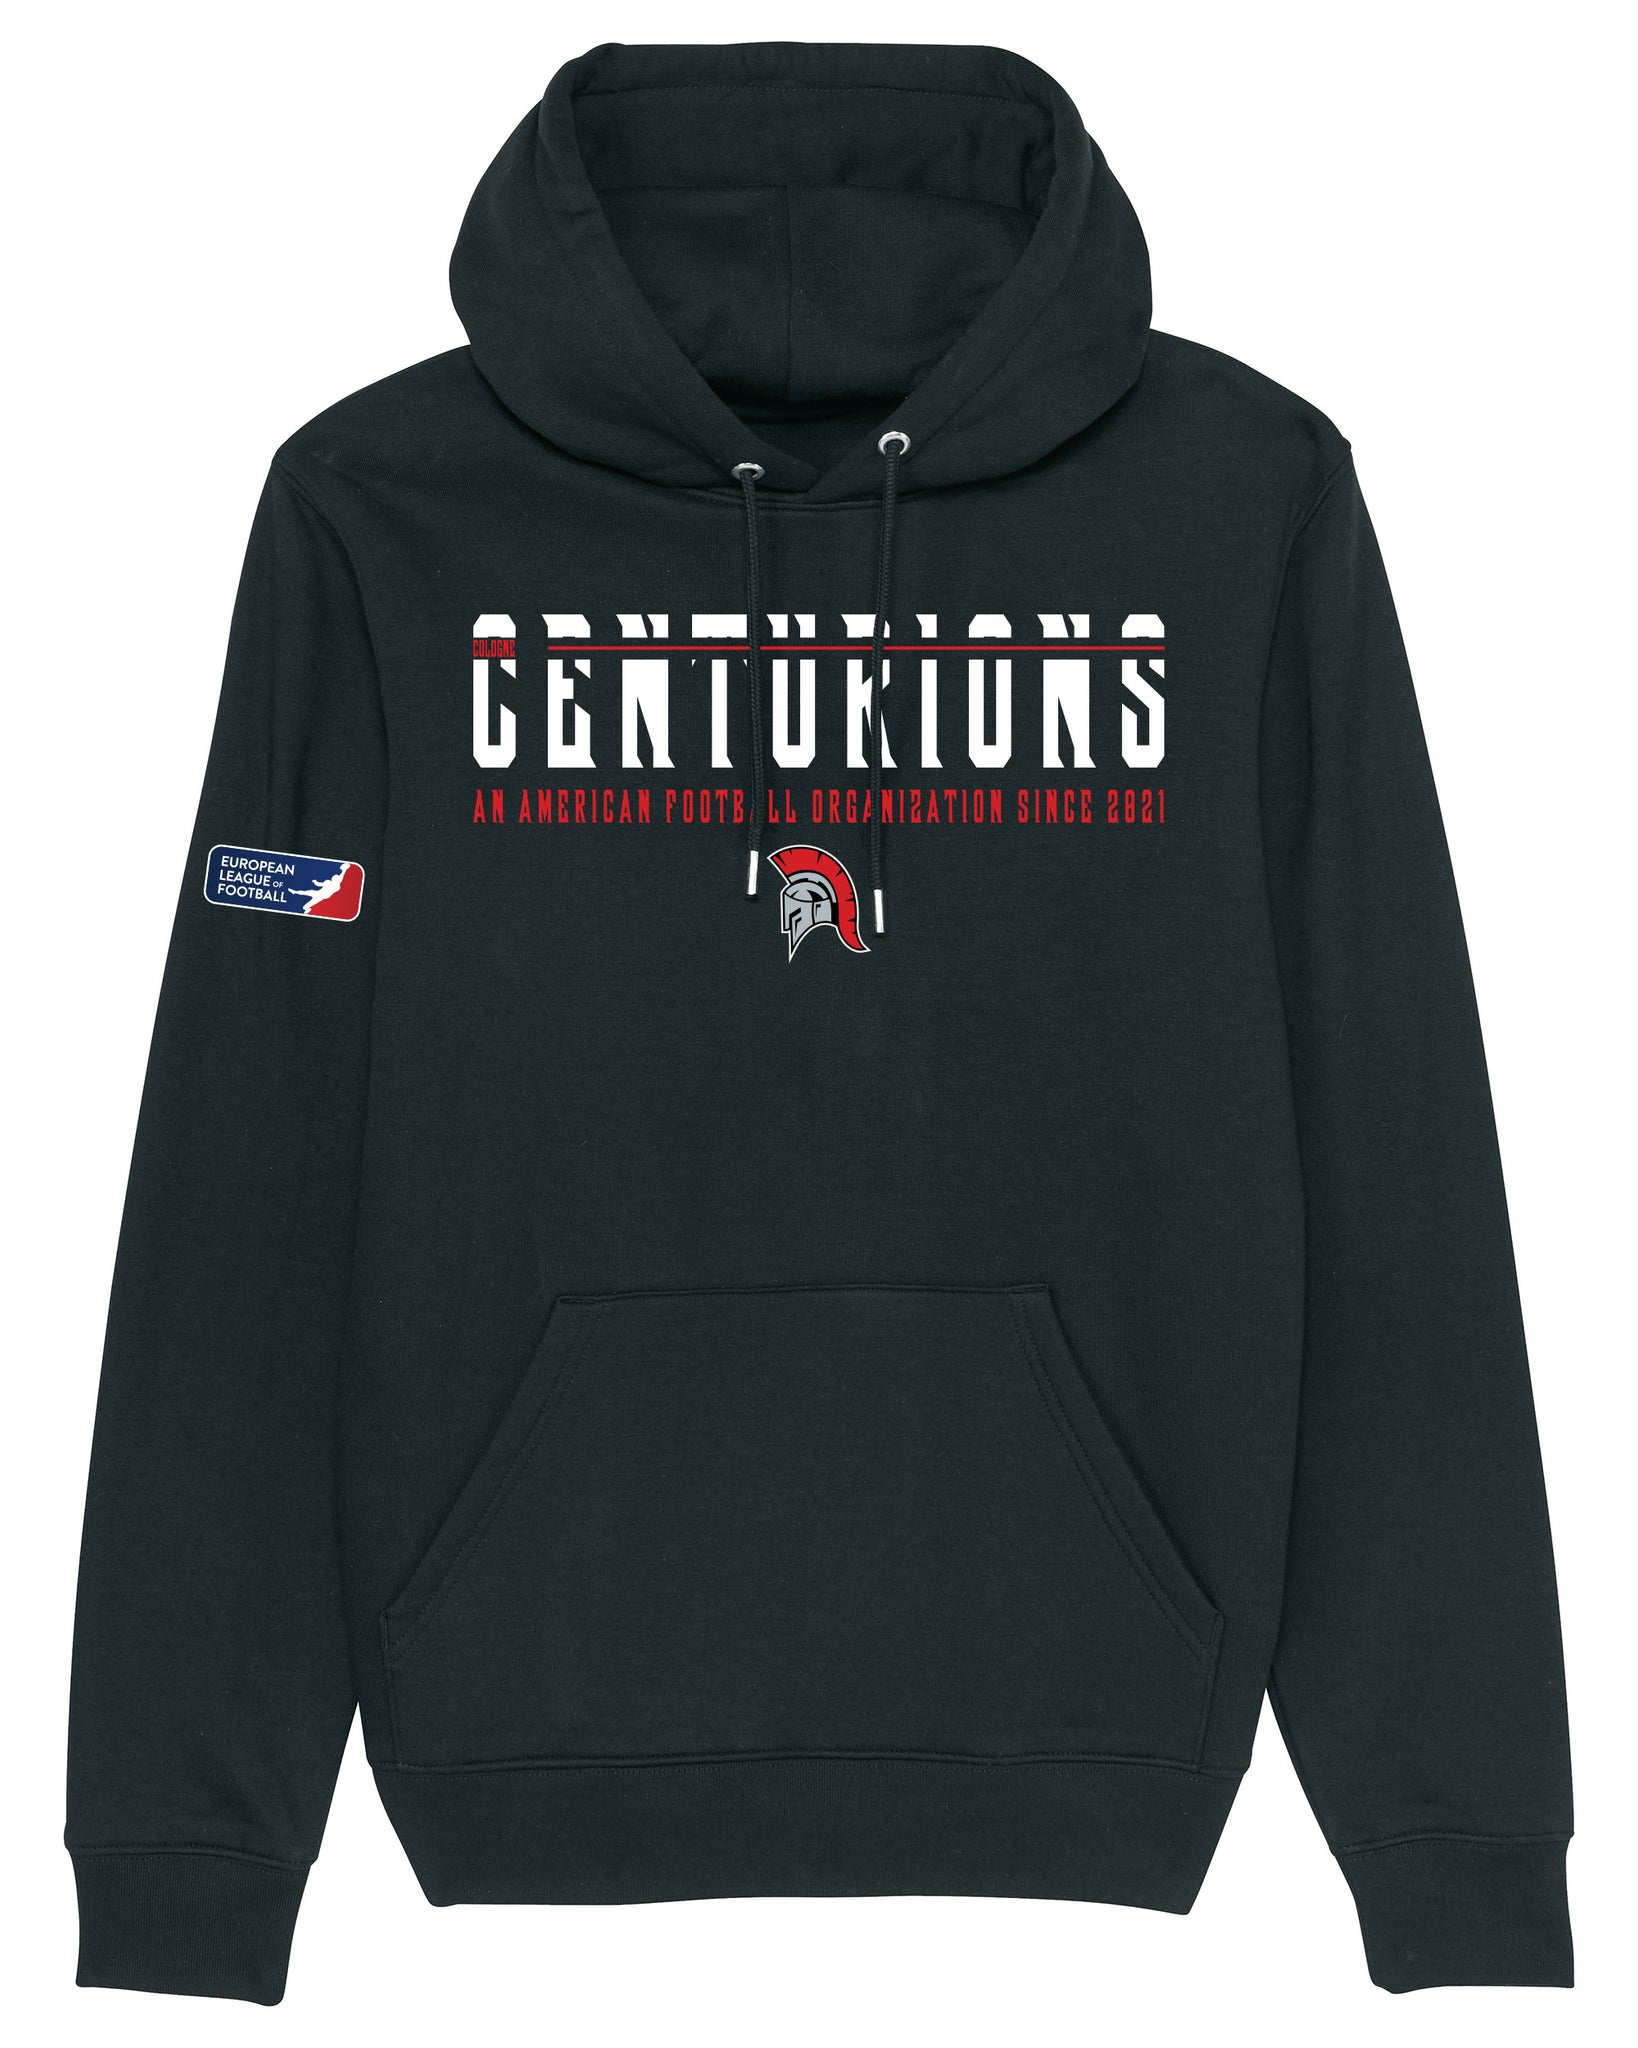 Cologne Centurions Sideline Hoodie 2022